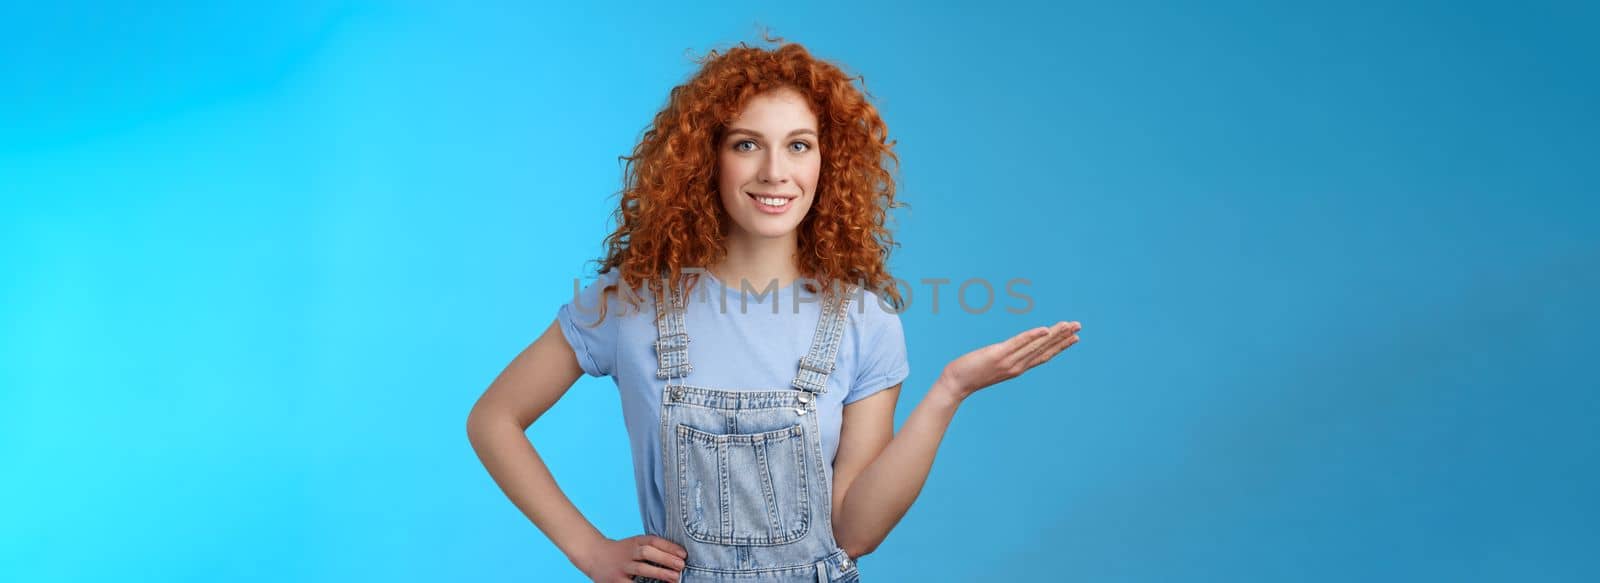 Let me show you cool product. Attractive cheerful confident redhead female model curly hairstyle present customers object hold palm blank blue copy space advertising standing blue background.